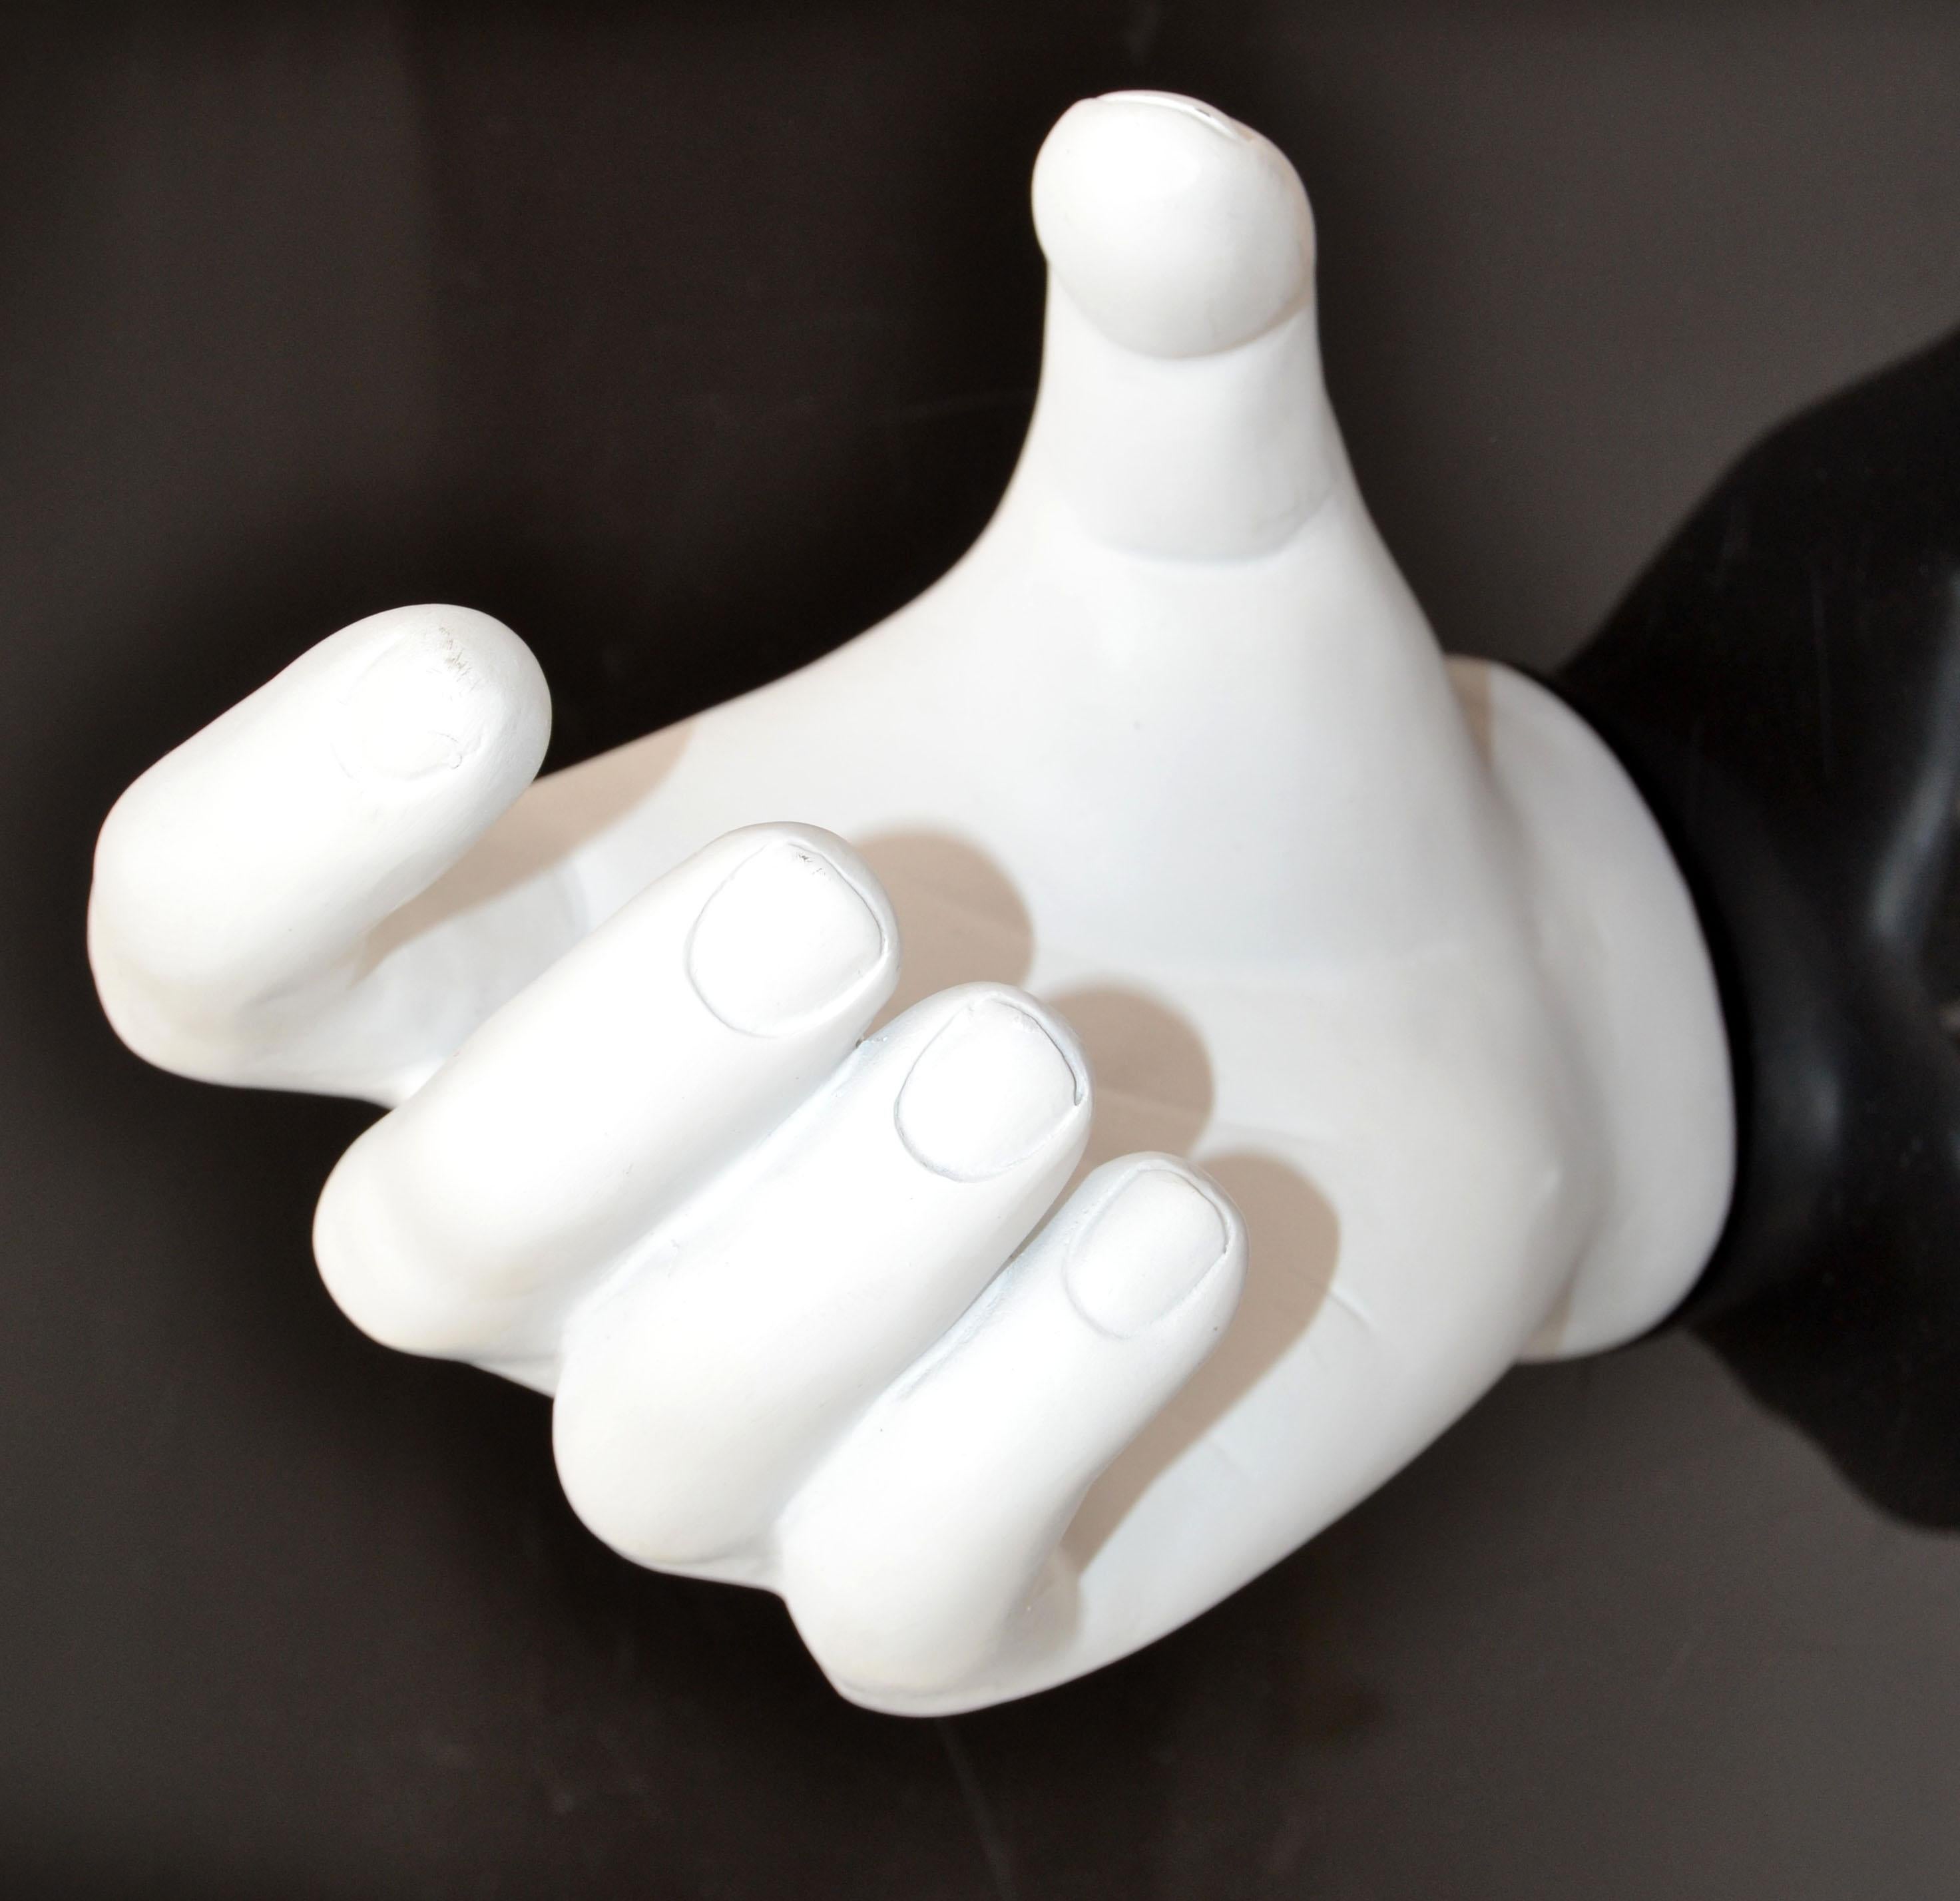 White Resin Wall mounted Figurative Hand sculpture Mid-Century Modern.
Practical for holding Your keys in a secure place.